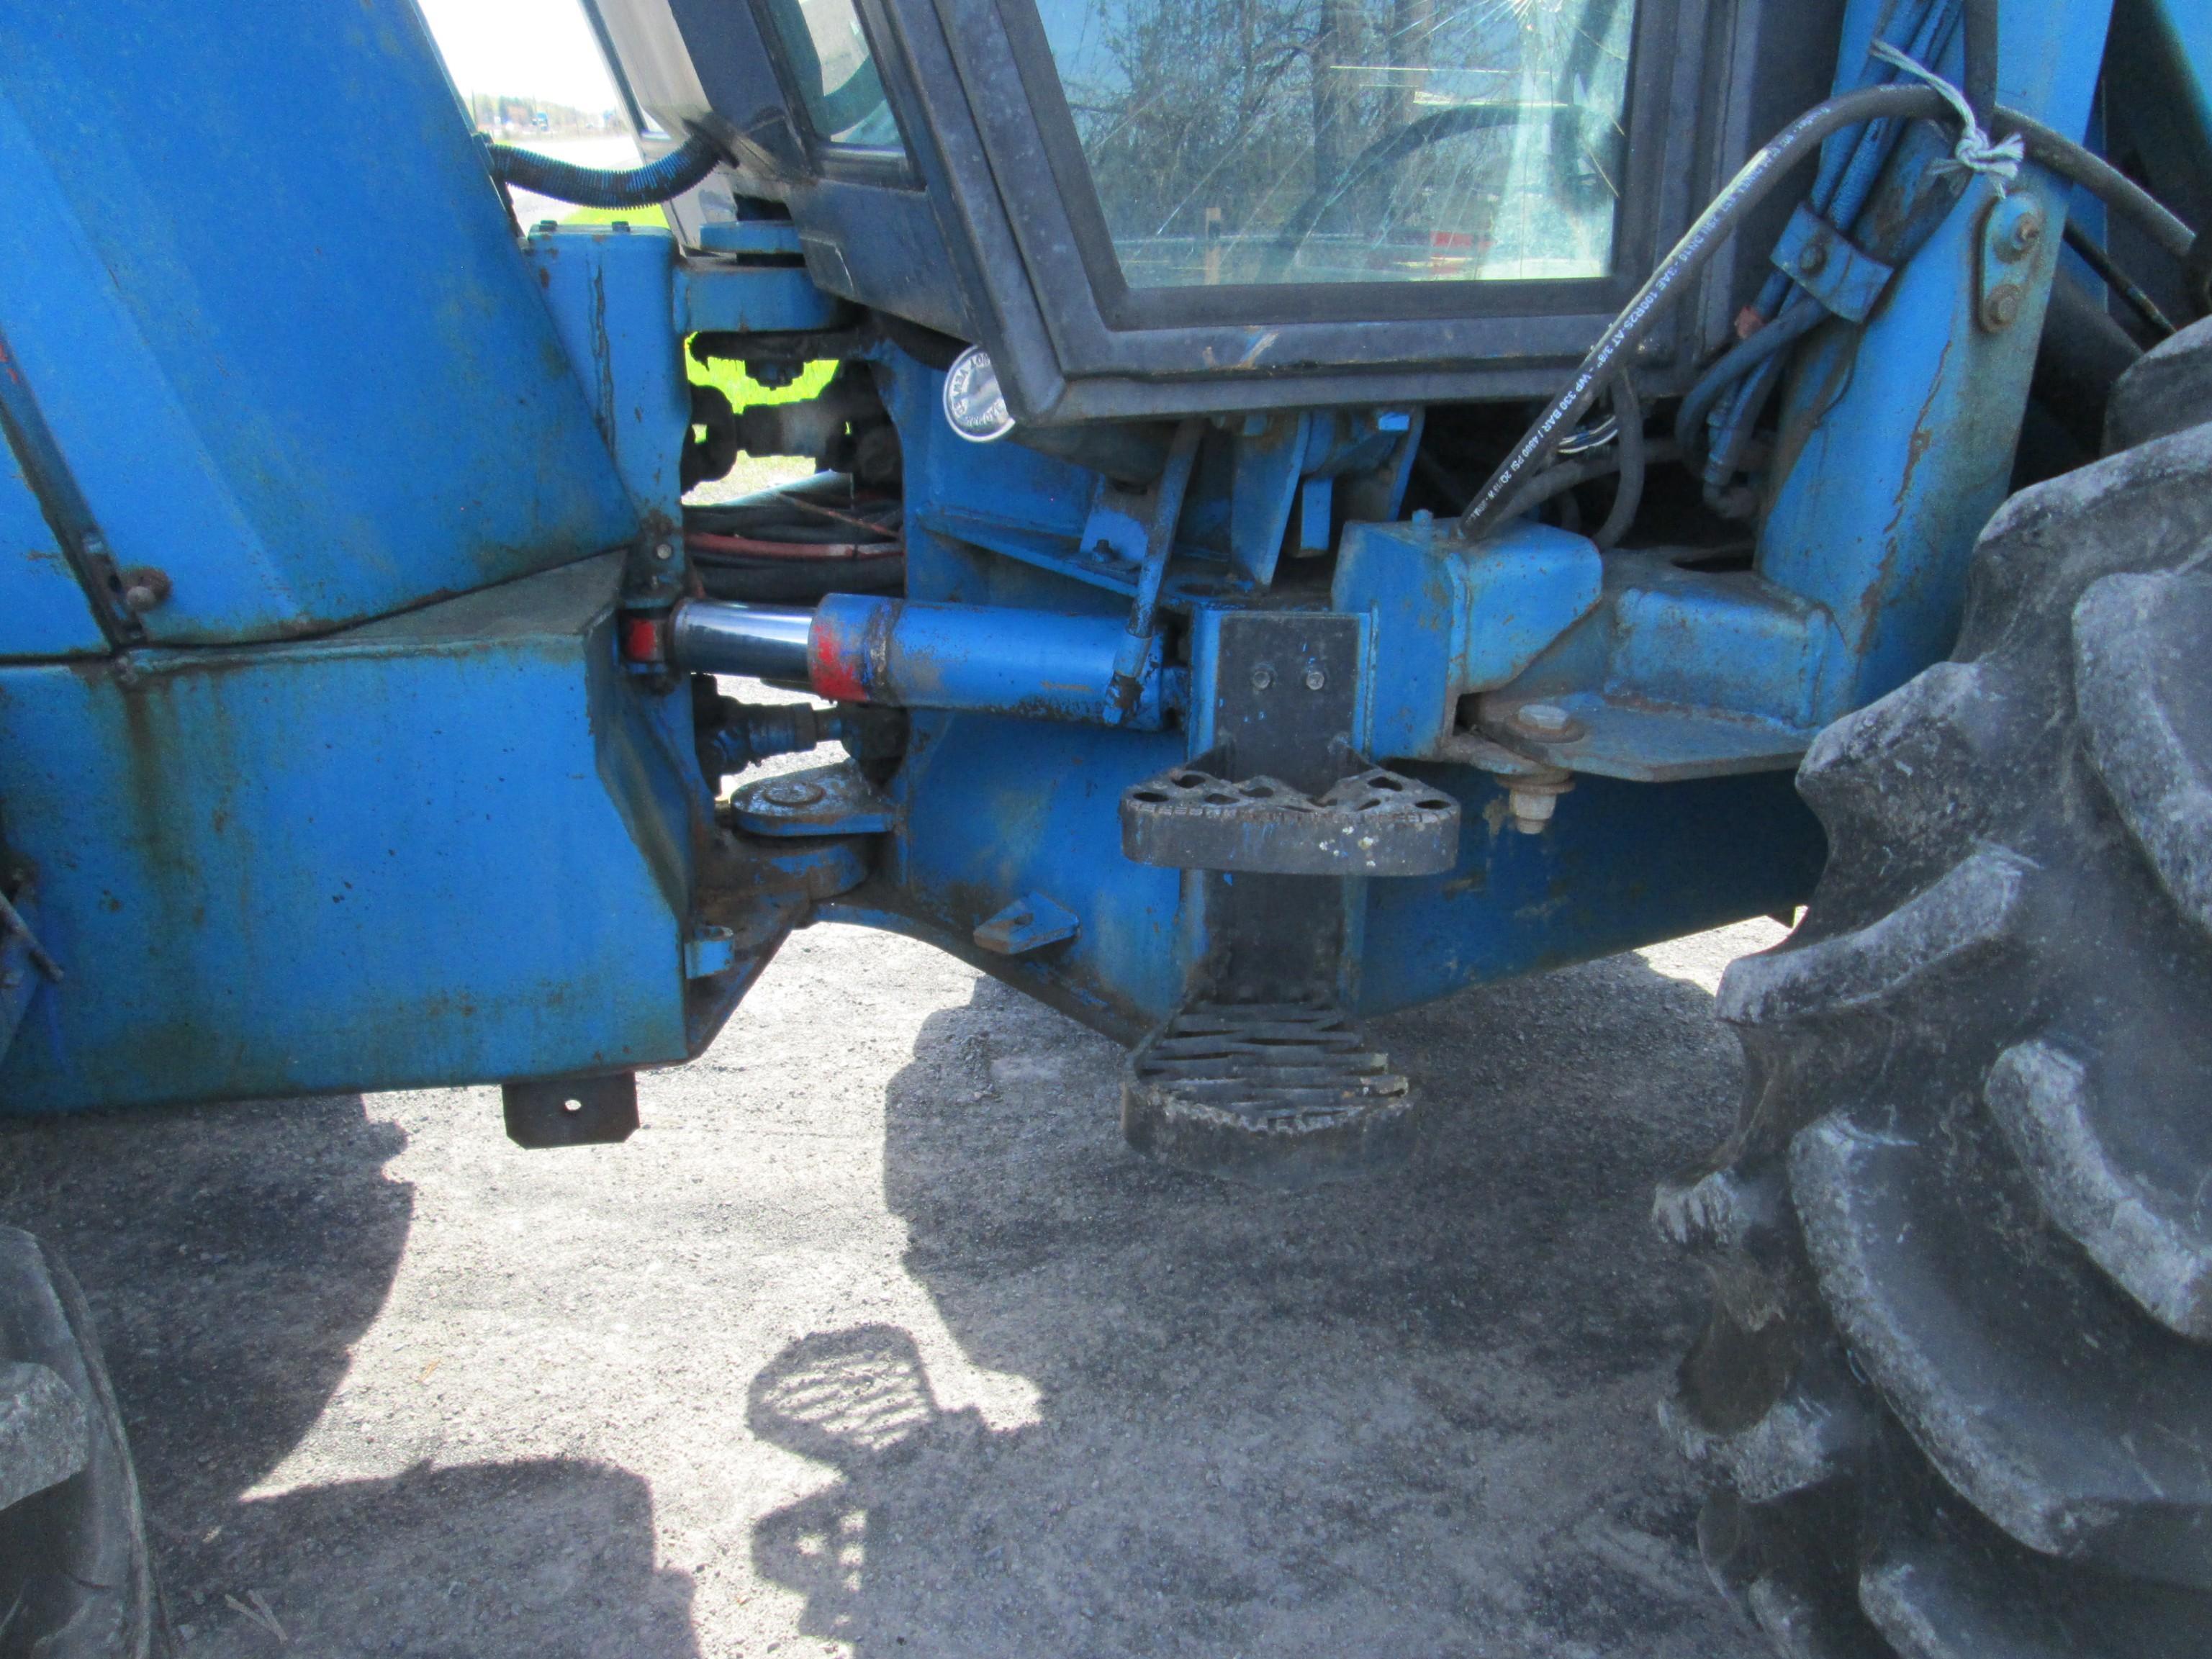 RUBBER TIRED LOADER FORD VERSATILE 9030 4x4 TRACTOR SN 25684205578, POWERED BY FORD DIESEL ENGINE,